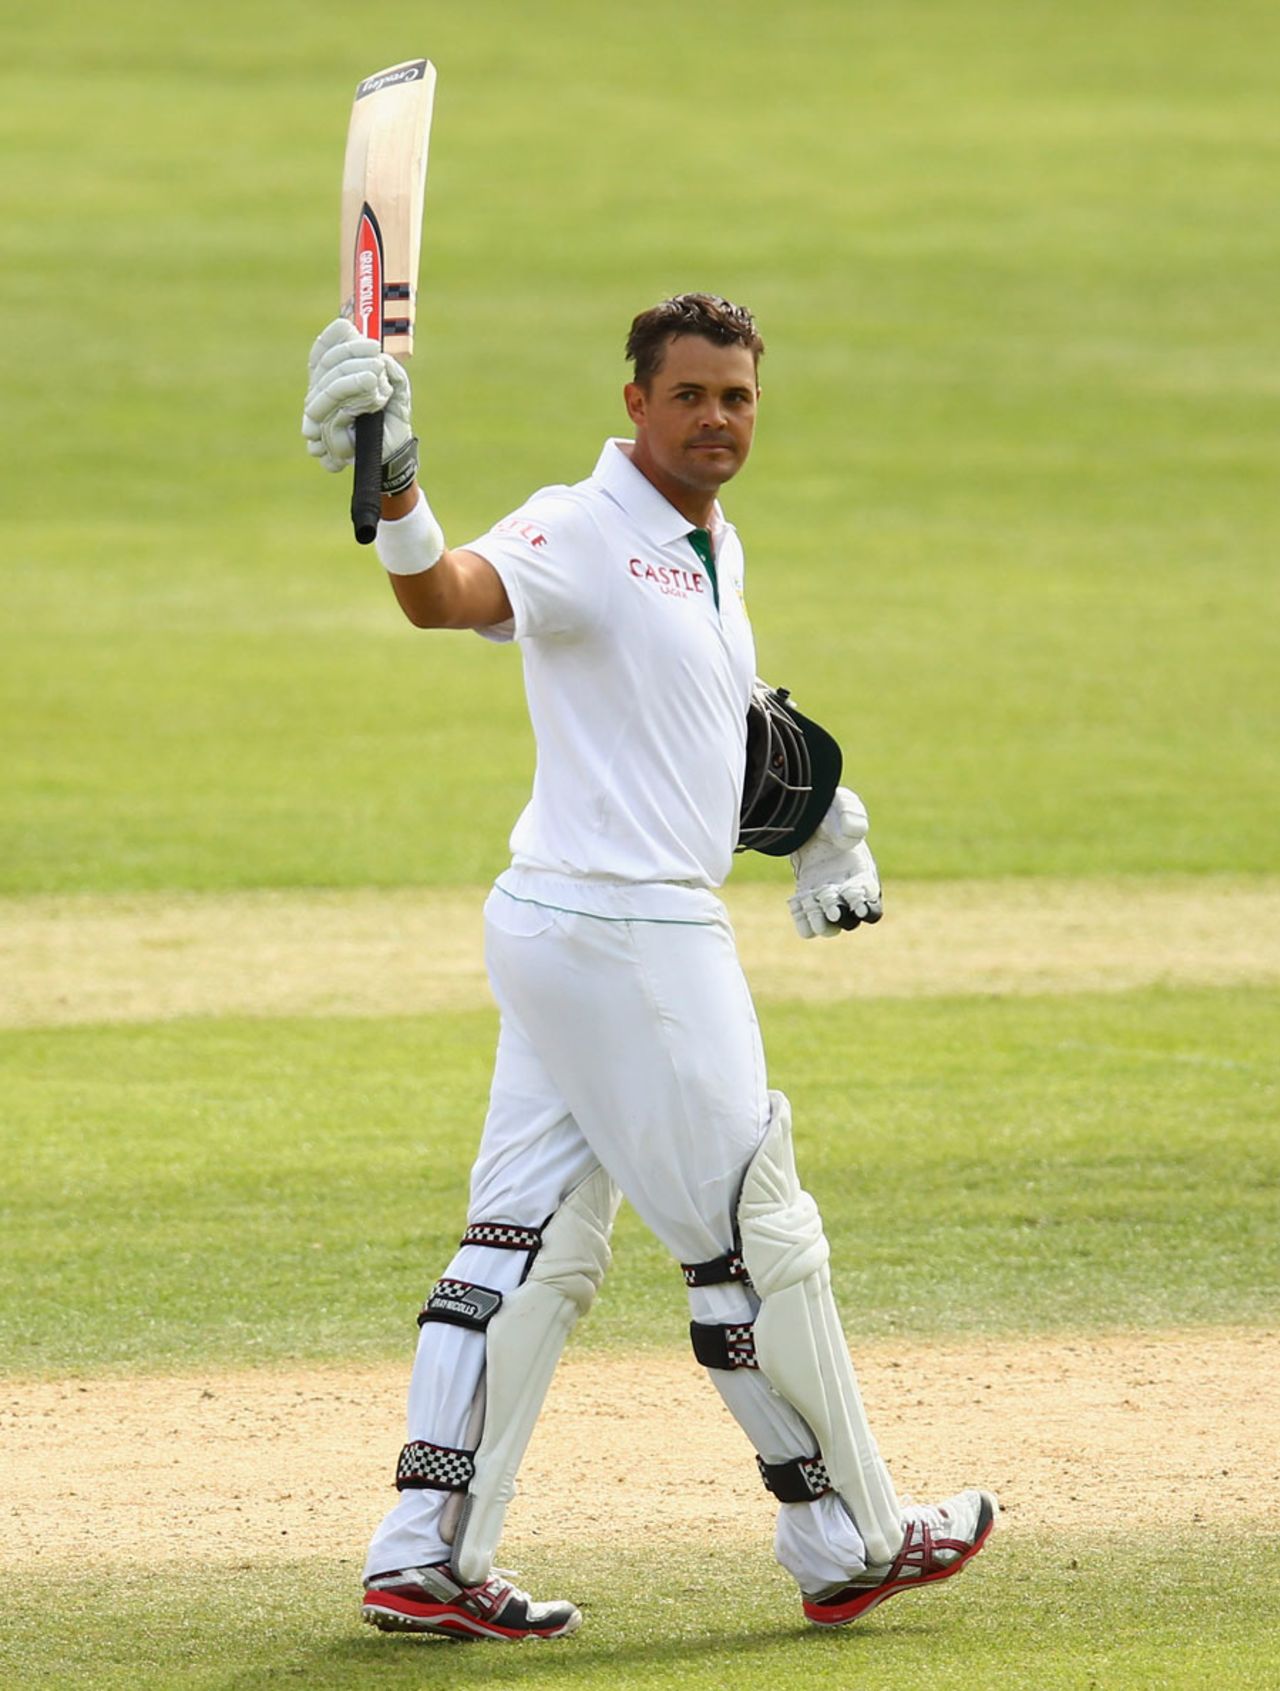 Jacques Rudolph raises his bat after reaching his hundred, New Zealand v South Africa, 1st Test, Dunedin, 4th day, March 10, 2012